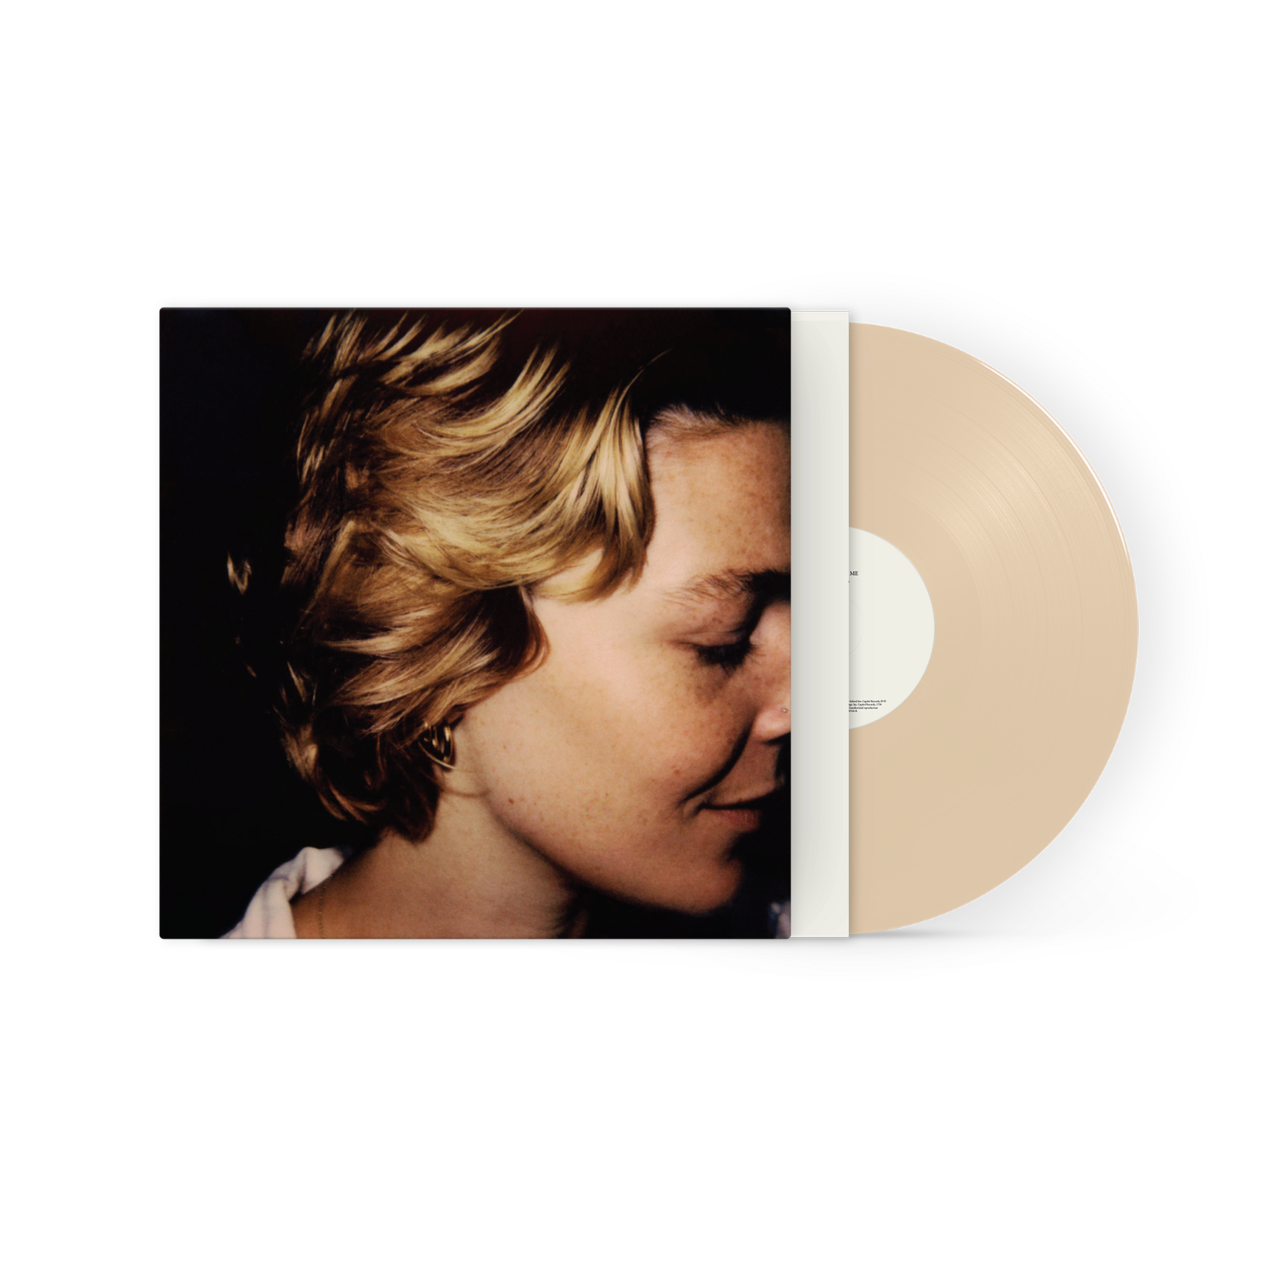 Don't Forget Me: Limited 'Nightgown' Cream Vinyl LP + Signed Art Card